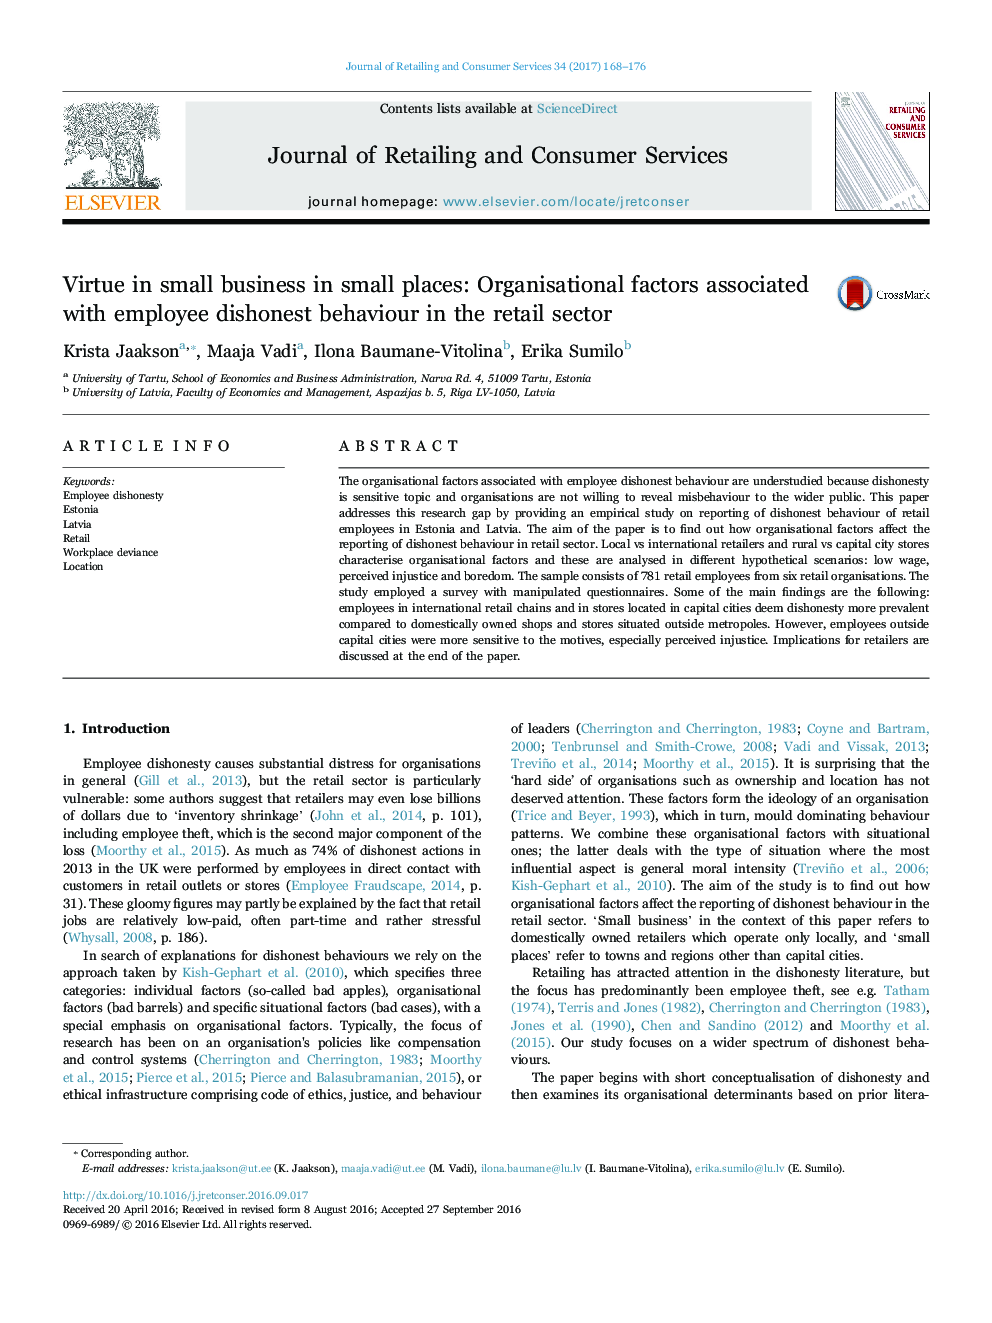 Virtue in small business in small places: Organisational factors associated with employee dishonest behaviour in the retail sector